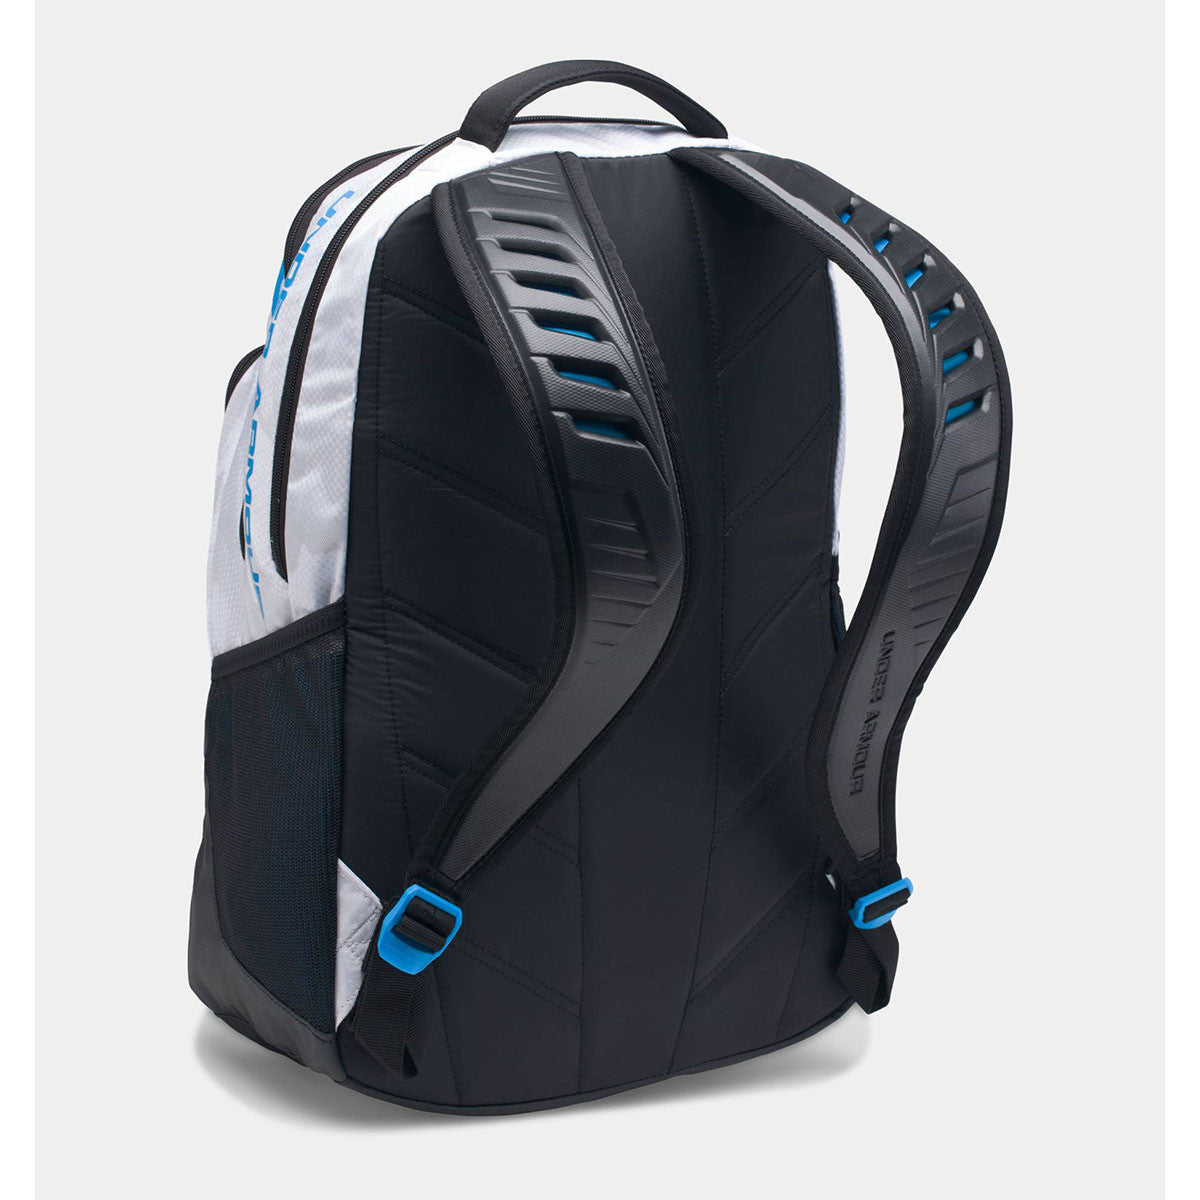 New Under Armour Storm Recruit Backpack Teal/Black/White